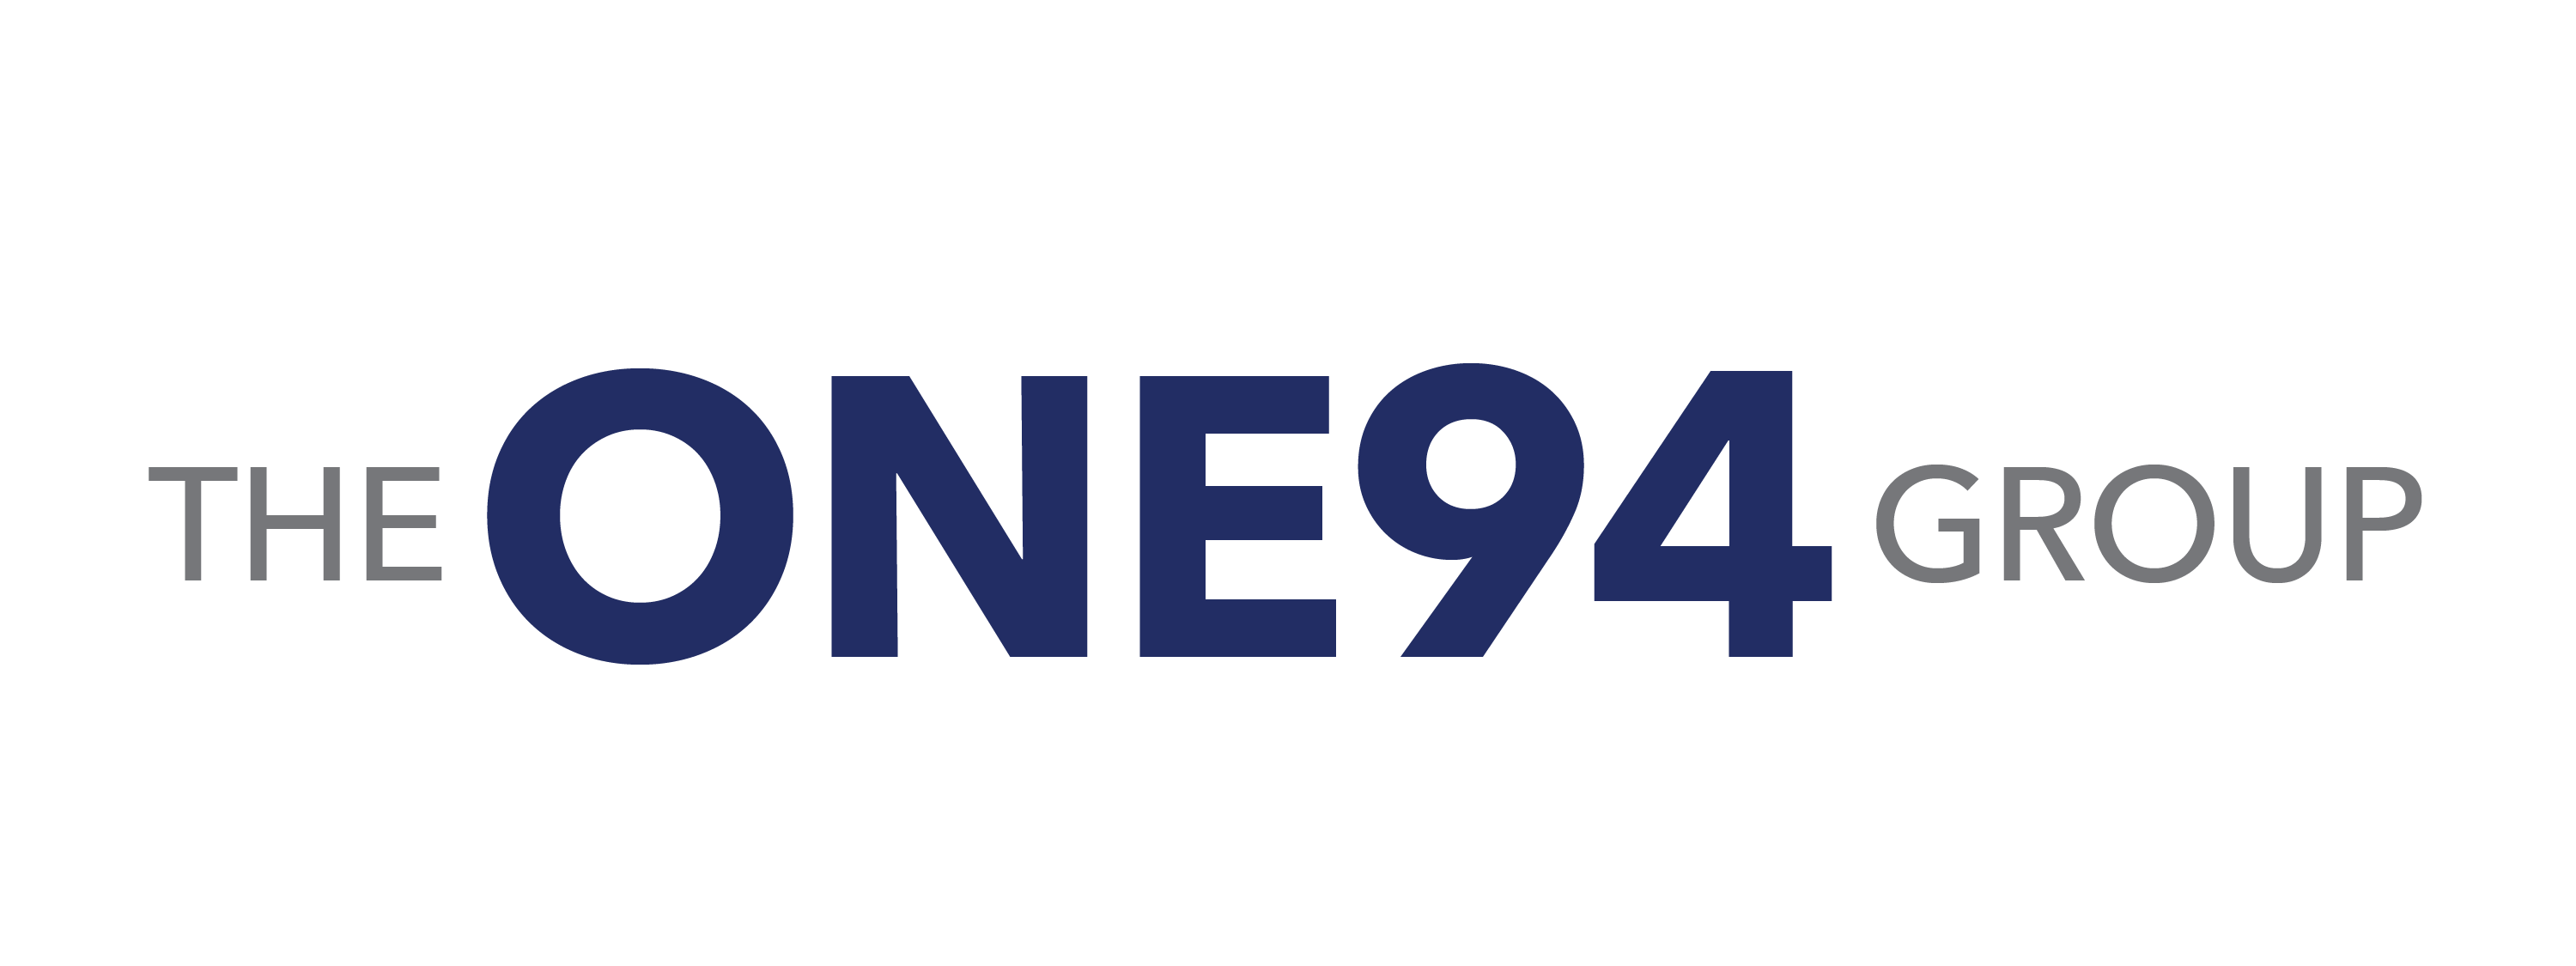 The ONE94 Group logo